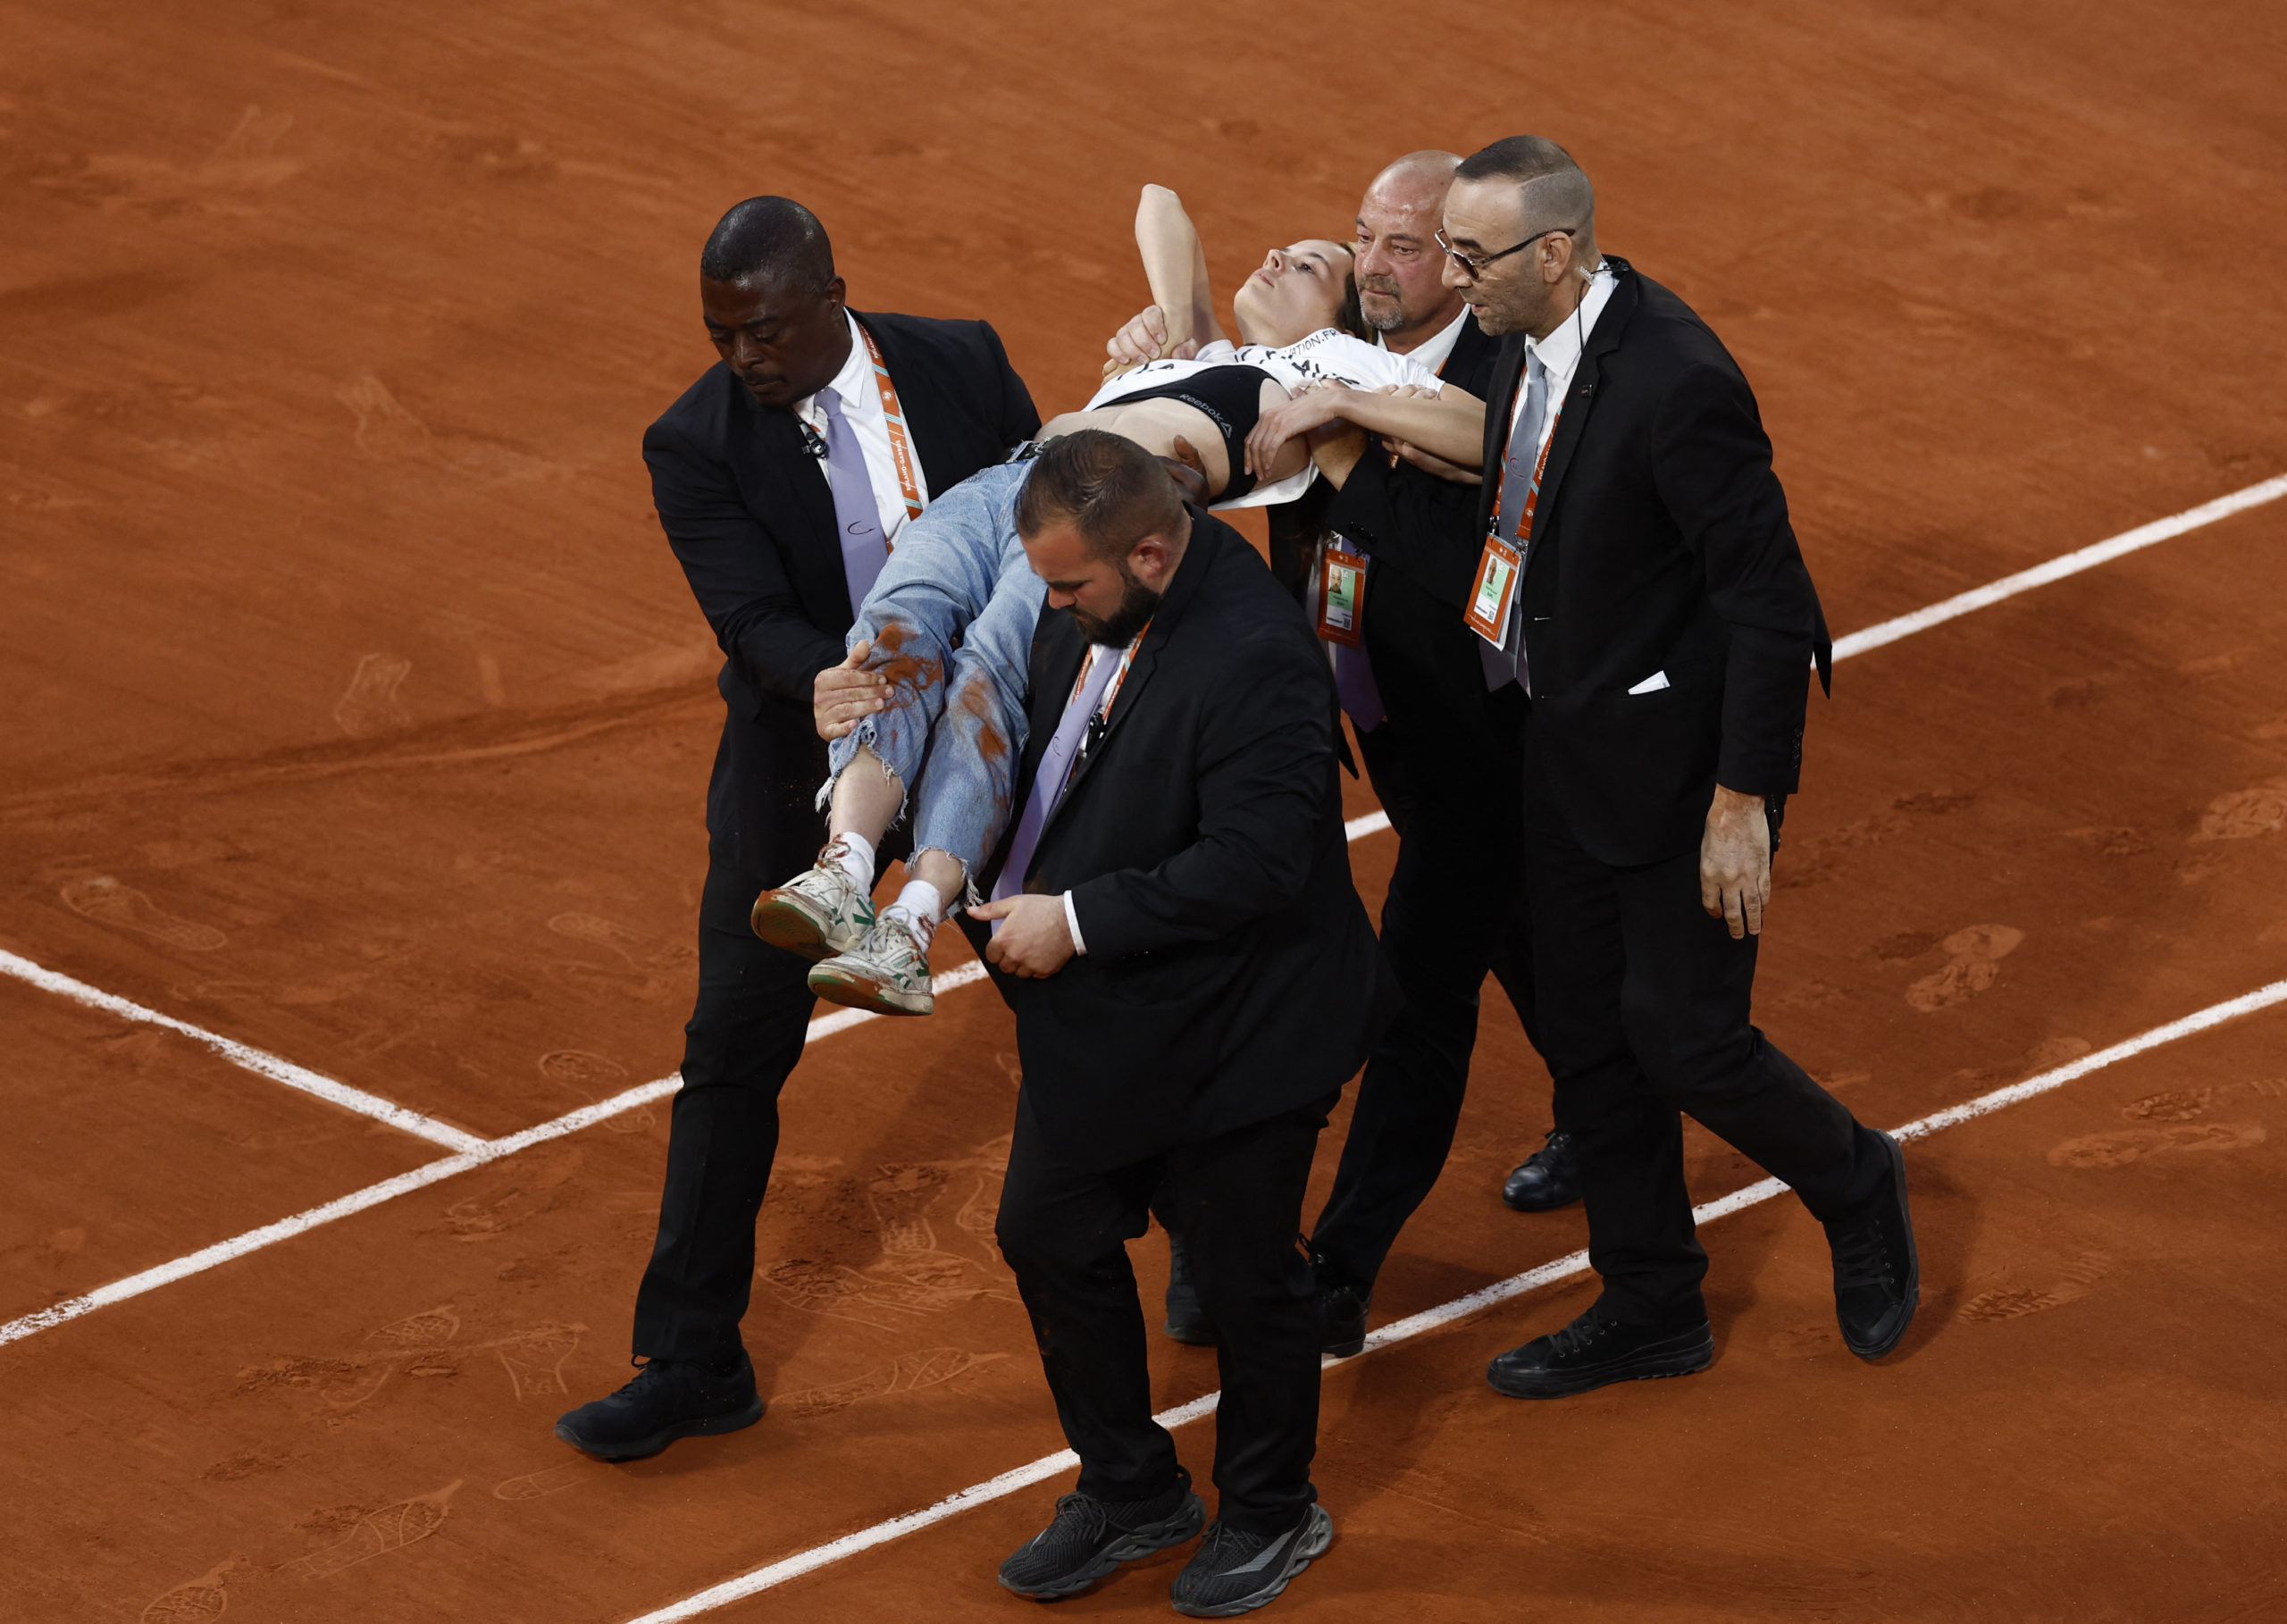 Tennis - French Open - Roland Garros, Paris, France - June 3, 2022 Security members take off the court a protestor after she ties herself to the net during the semi final between Norway's Casper Ruud and Croatia's Marin Cilic REUTERS/Yves Herman